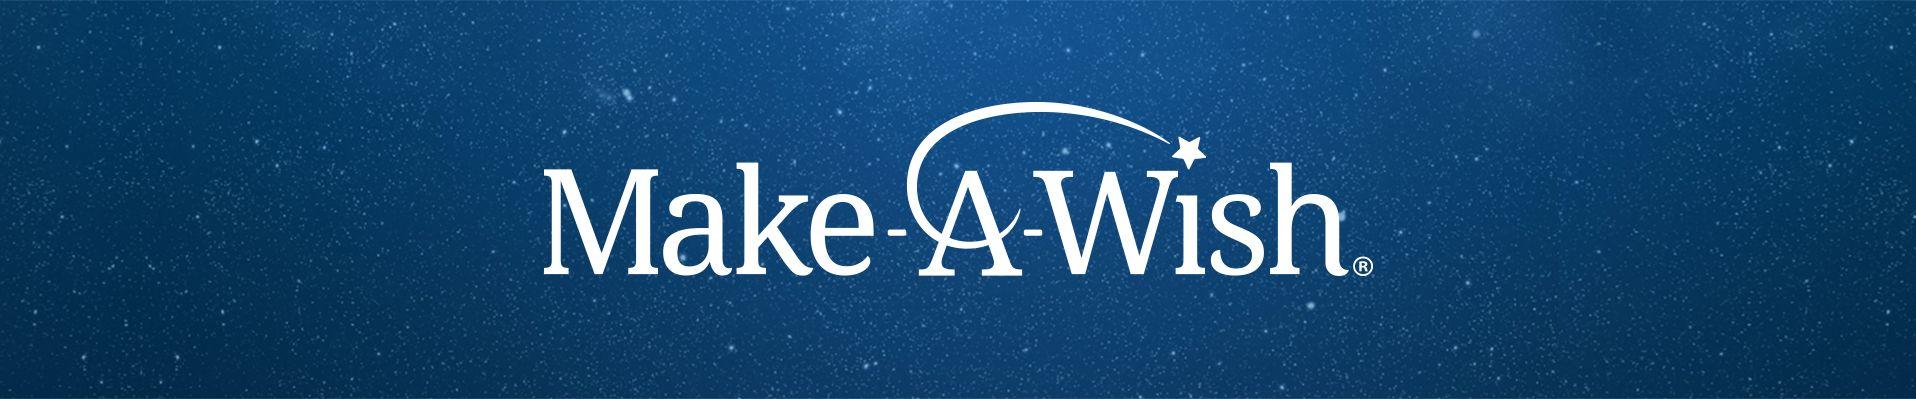 Make a Wish Logo - Eat-A-Dish for Make-A-Wish® 2018 | Maggiano's Little Italy